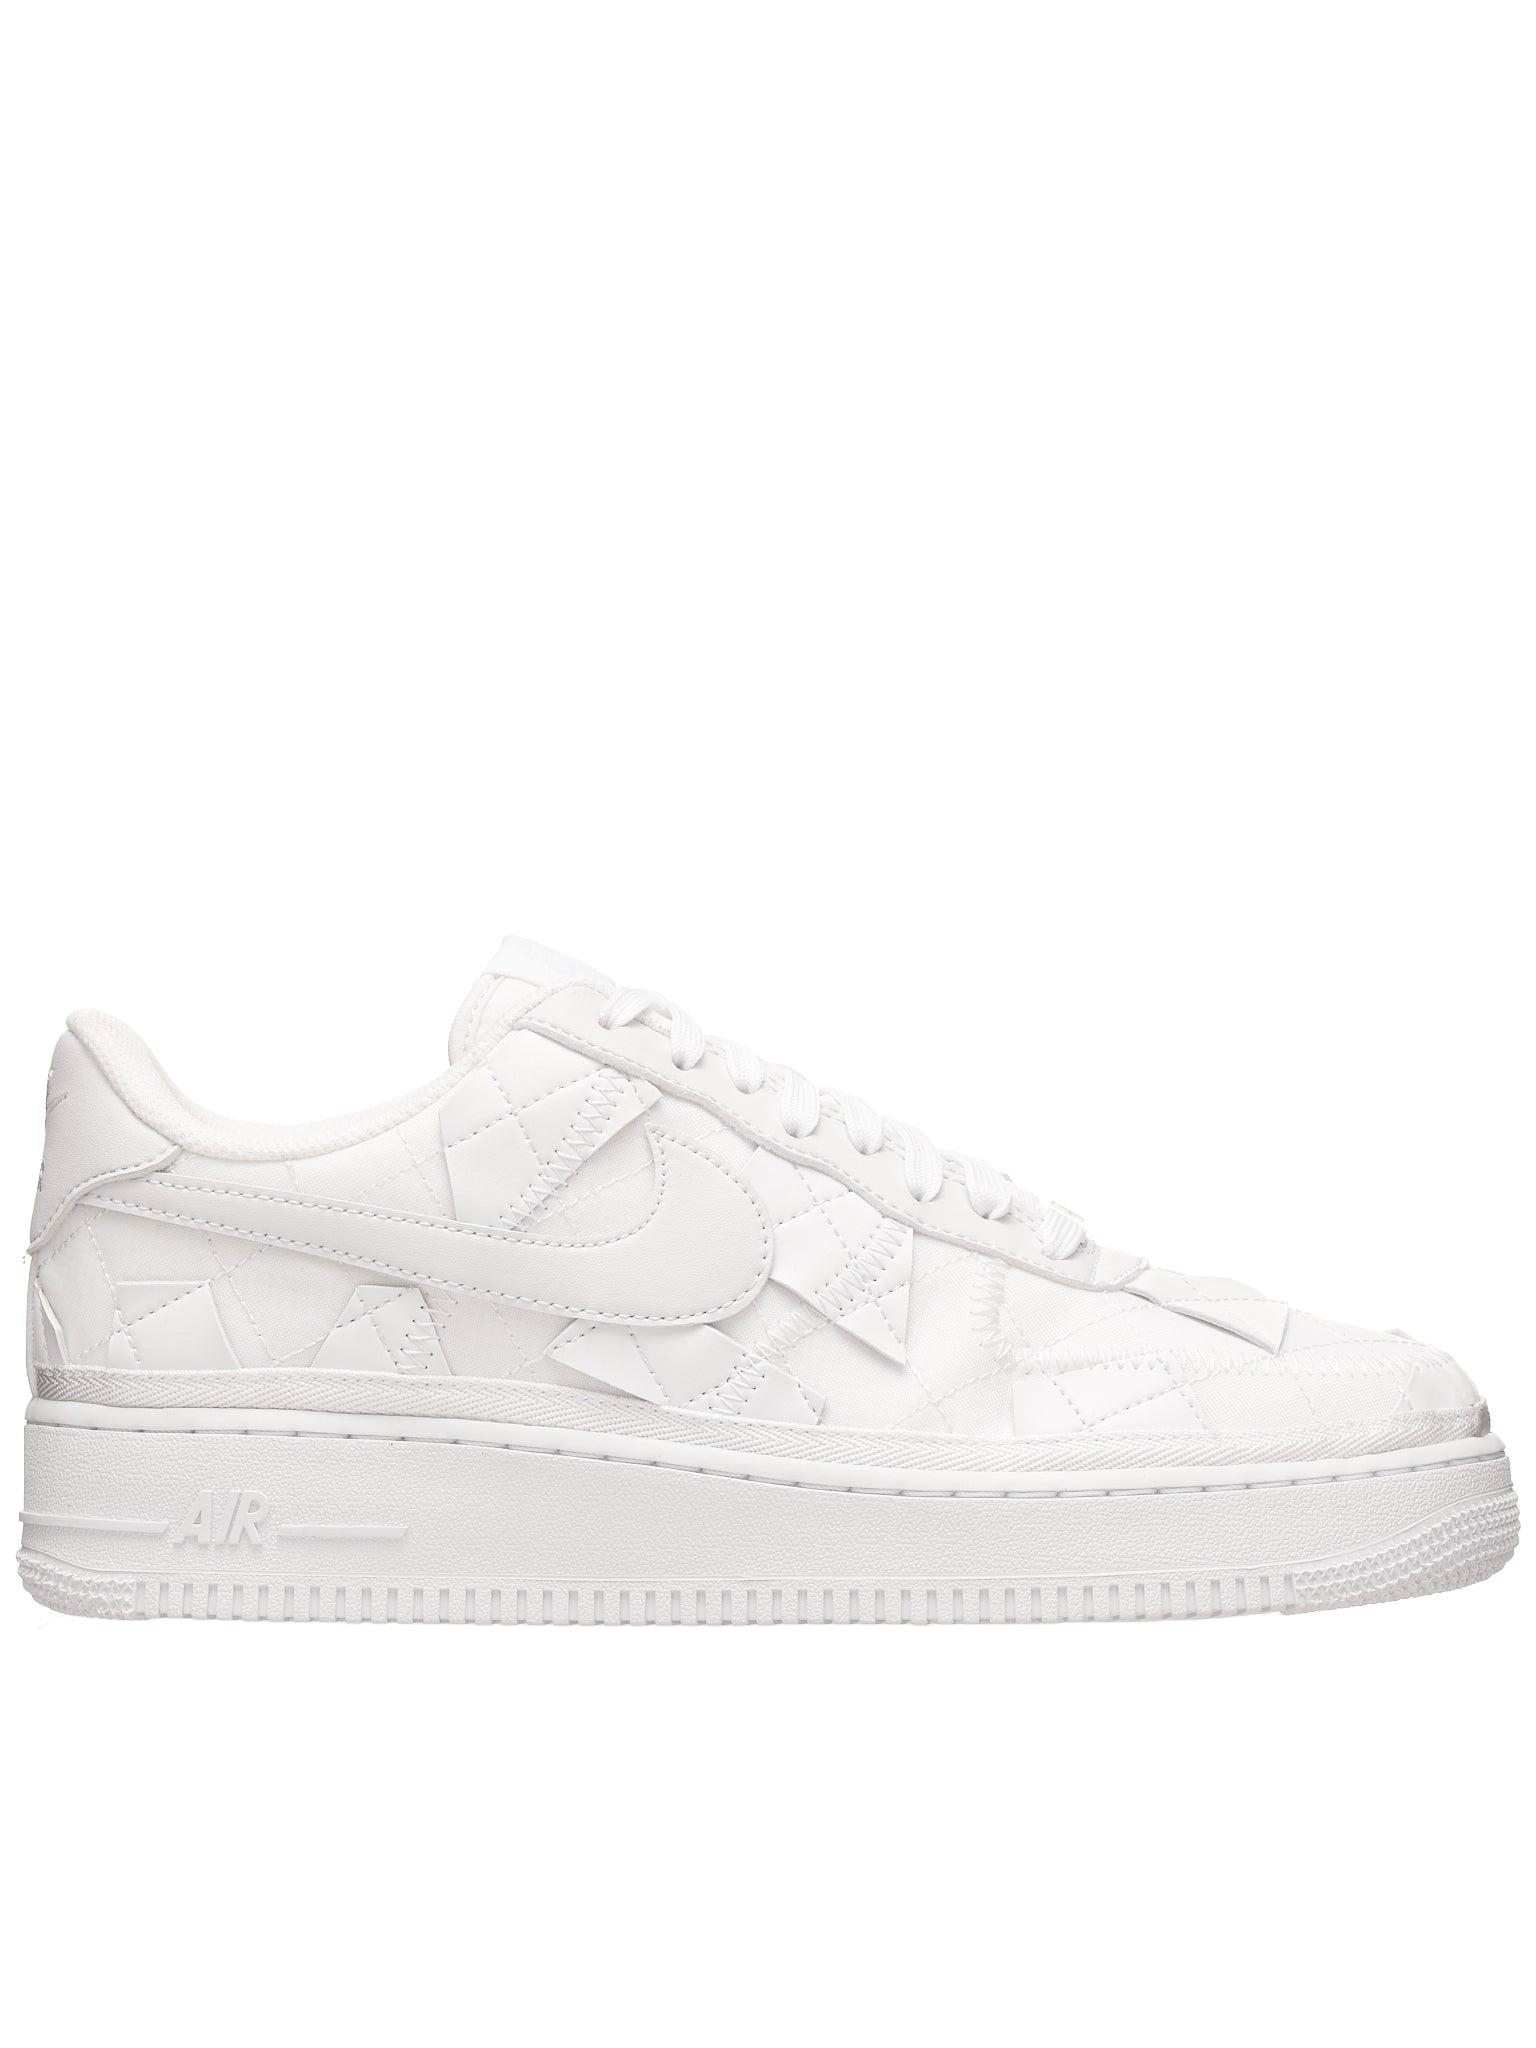 Nike Billie Eilish Air Force 1 Low in White | Lyst